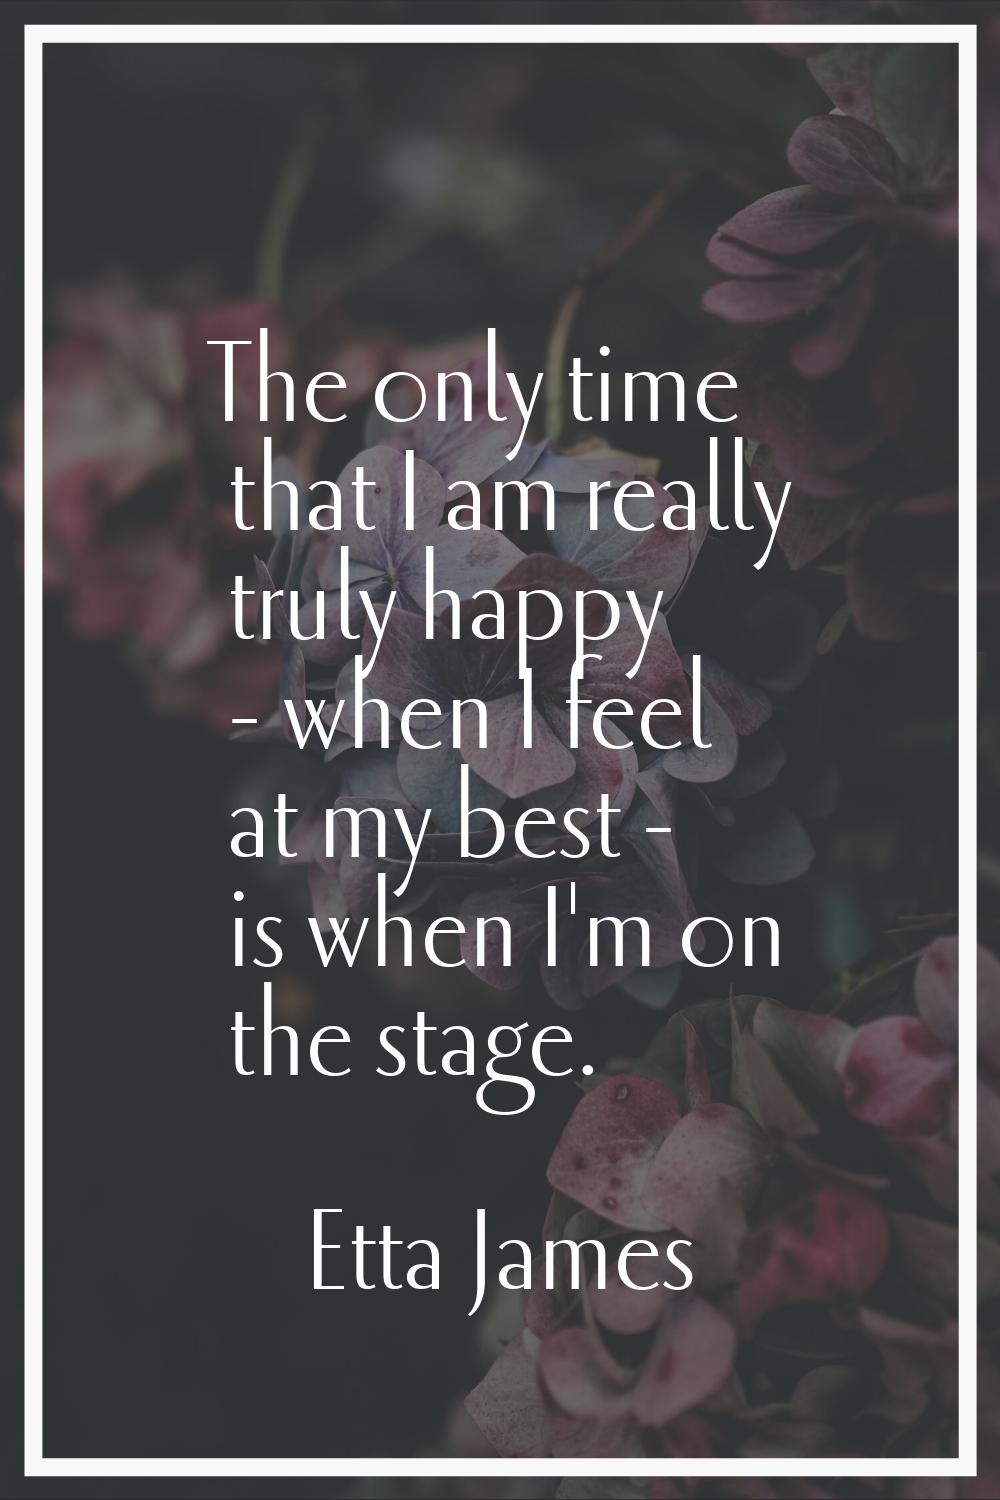 The only time that I am really truly happy - when I feel at my best - is when I'm on the stage.